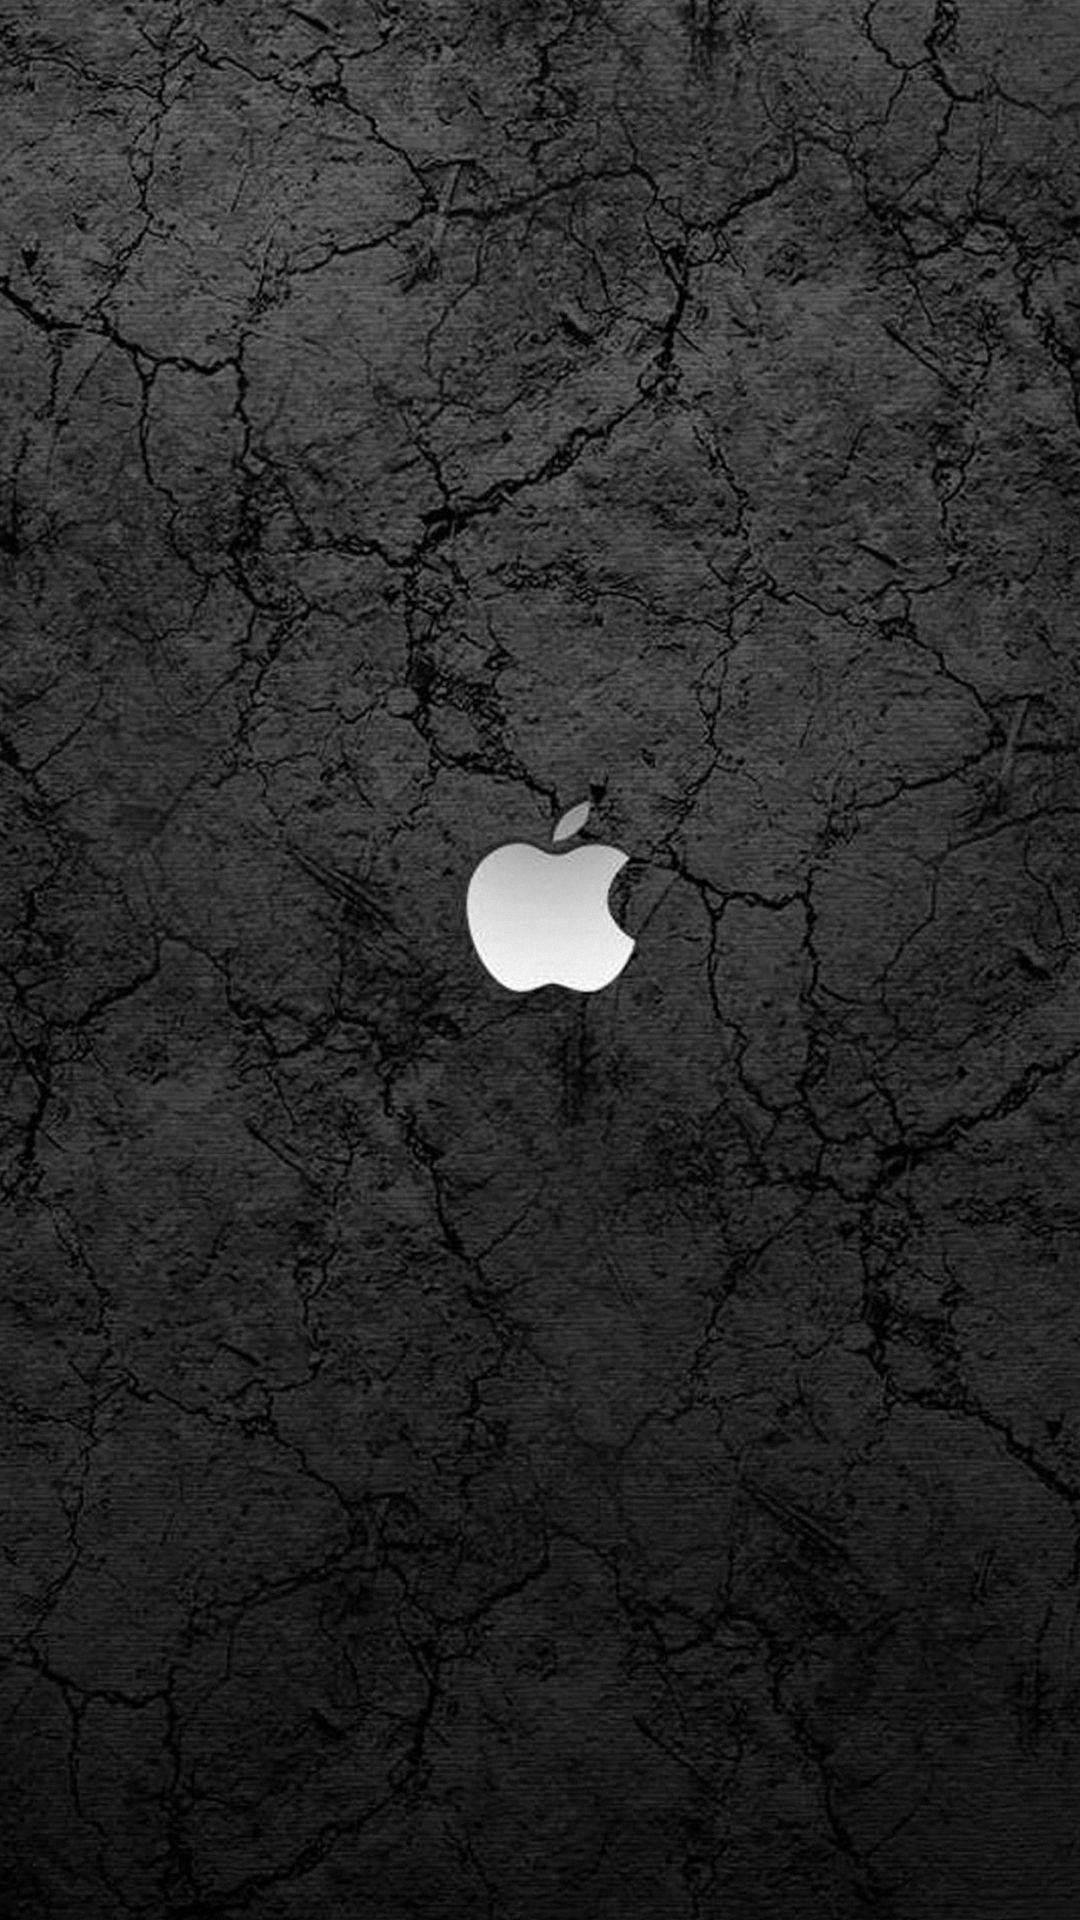 Simple Black White Iphone Background